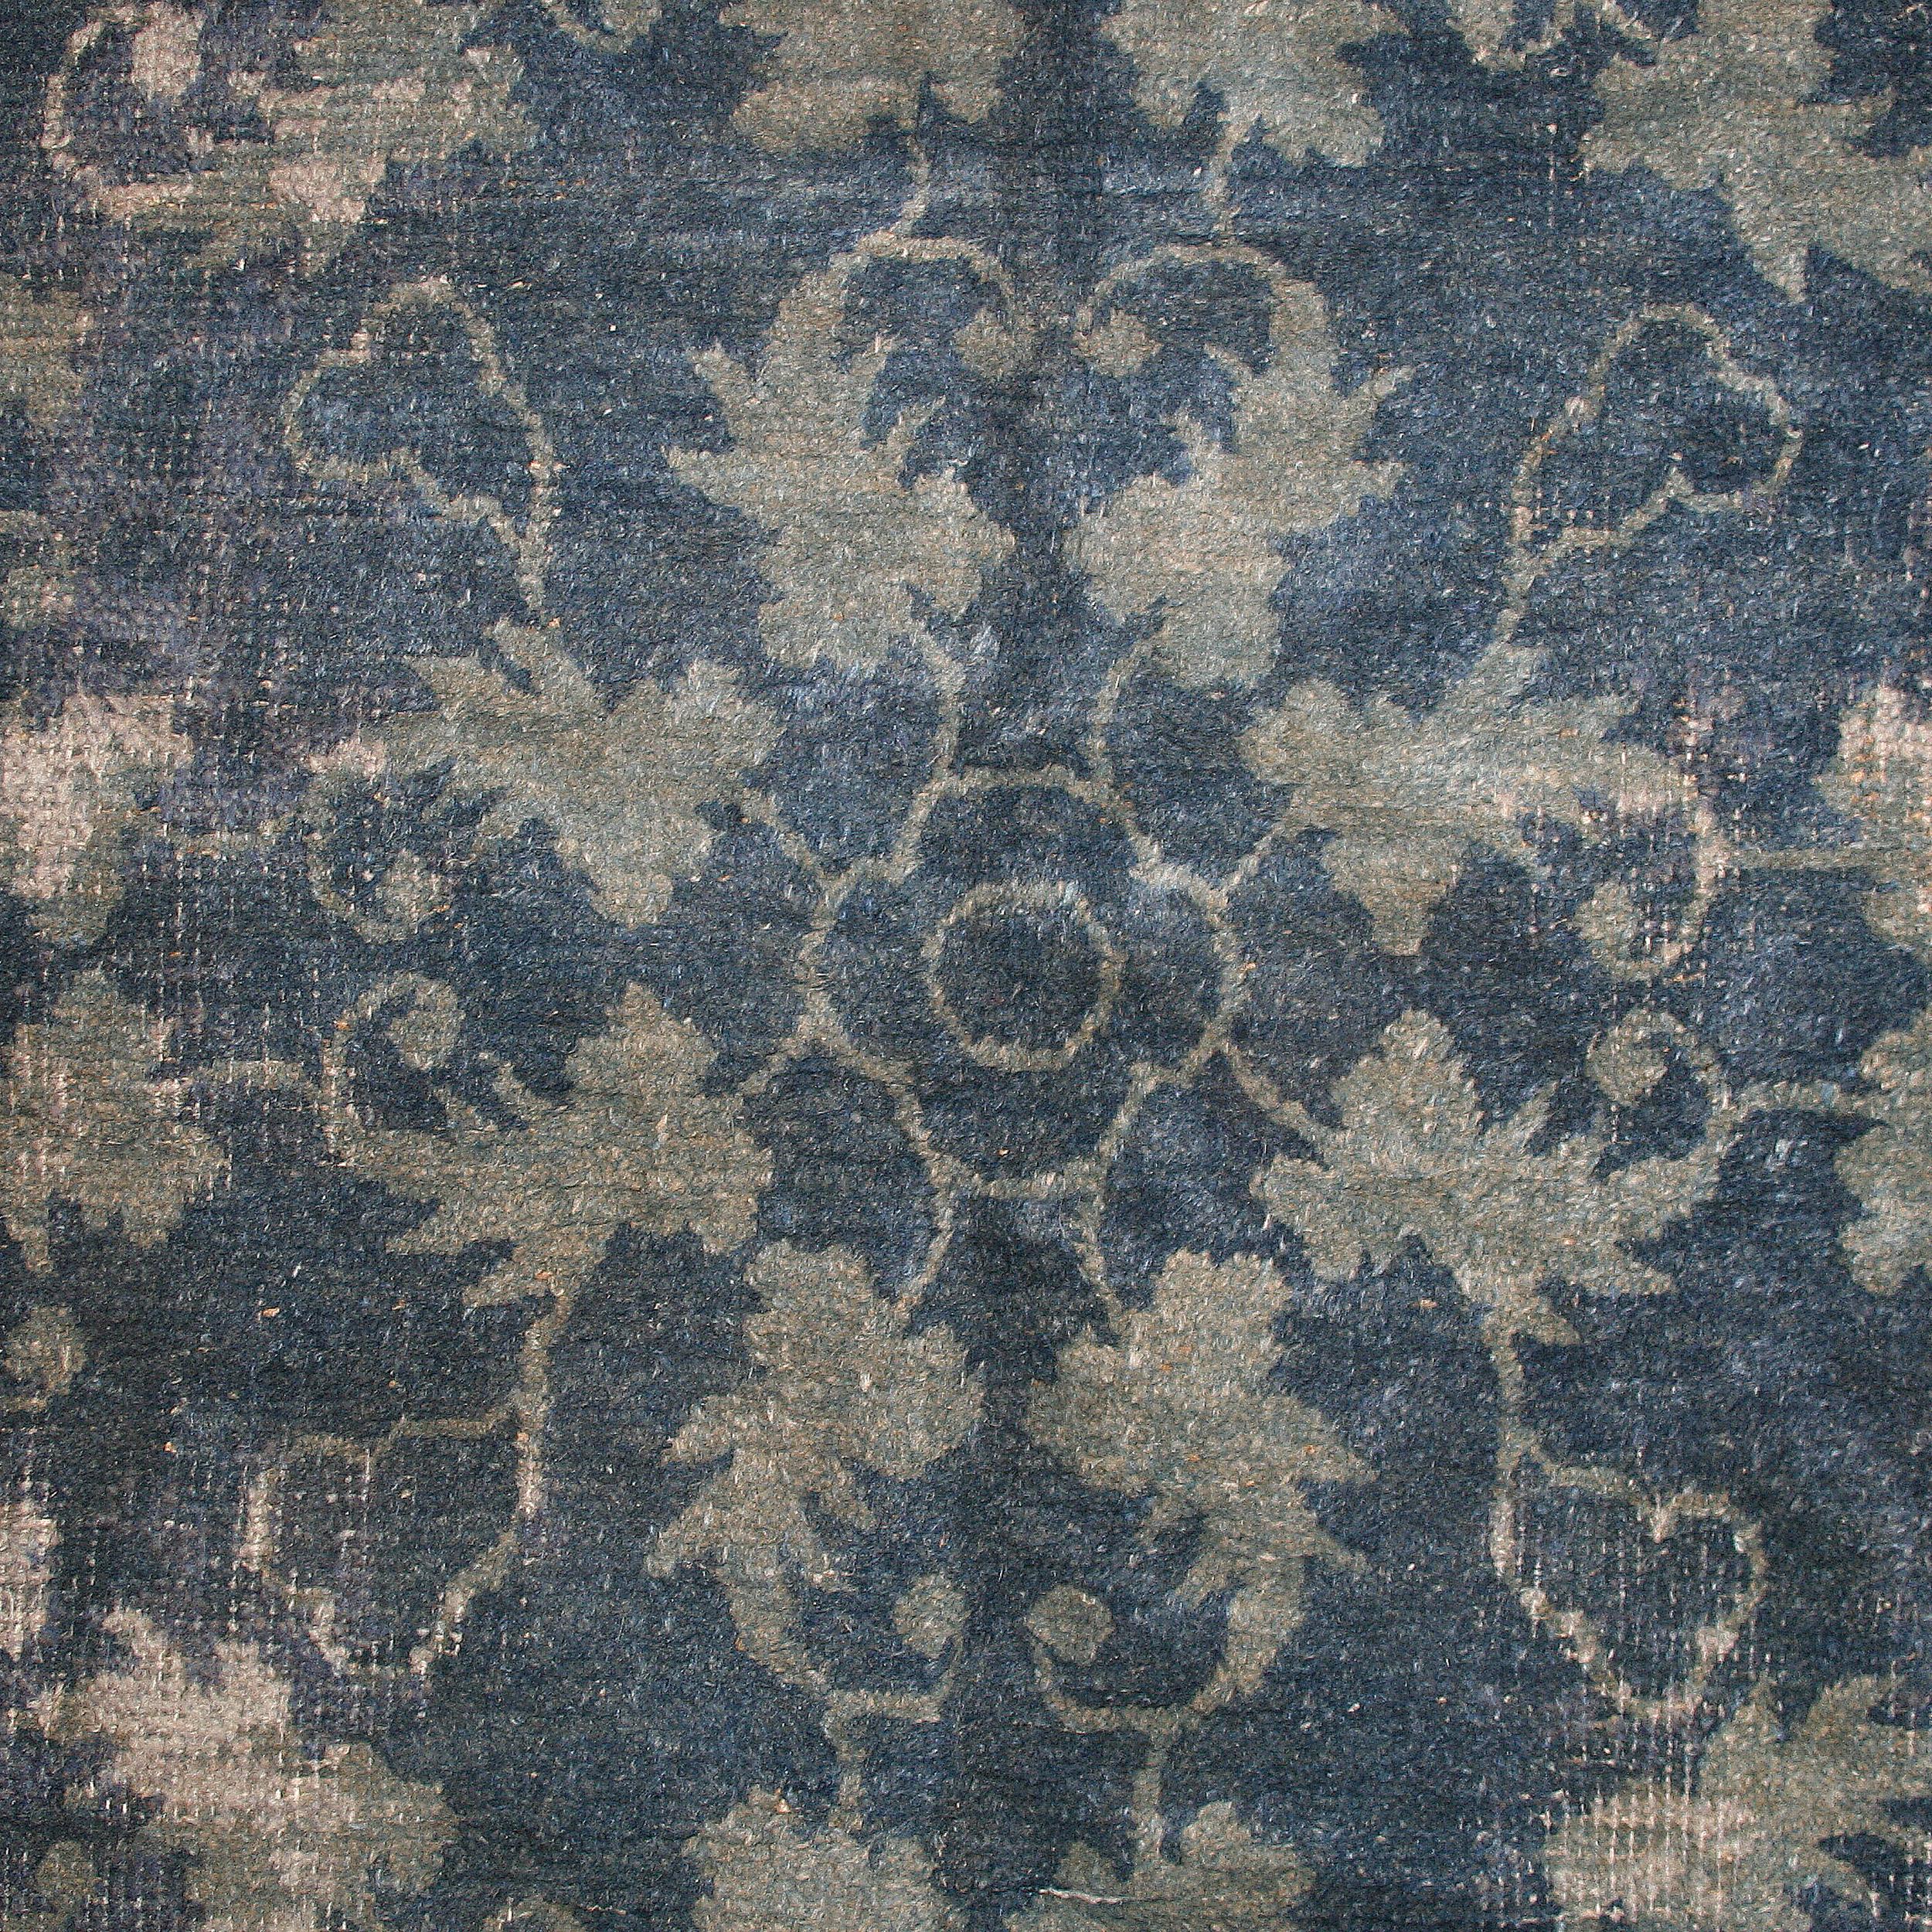 A highly refined antique Chinese carpet, distinguished by a subtle tone on tone pattern of scrolling leafs in sky blue on a denim blue background, reminiscent of the most sophisticated Imperial porcelain of the Ming period. The silky wool is